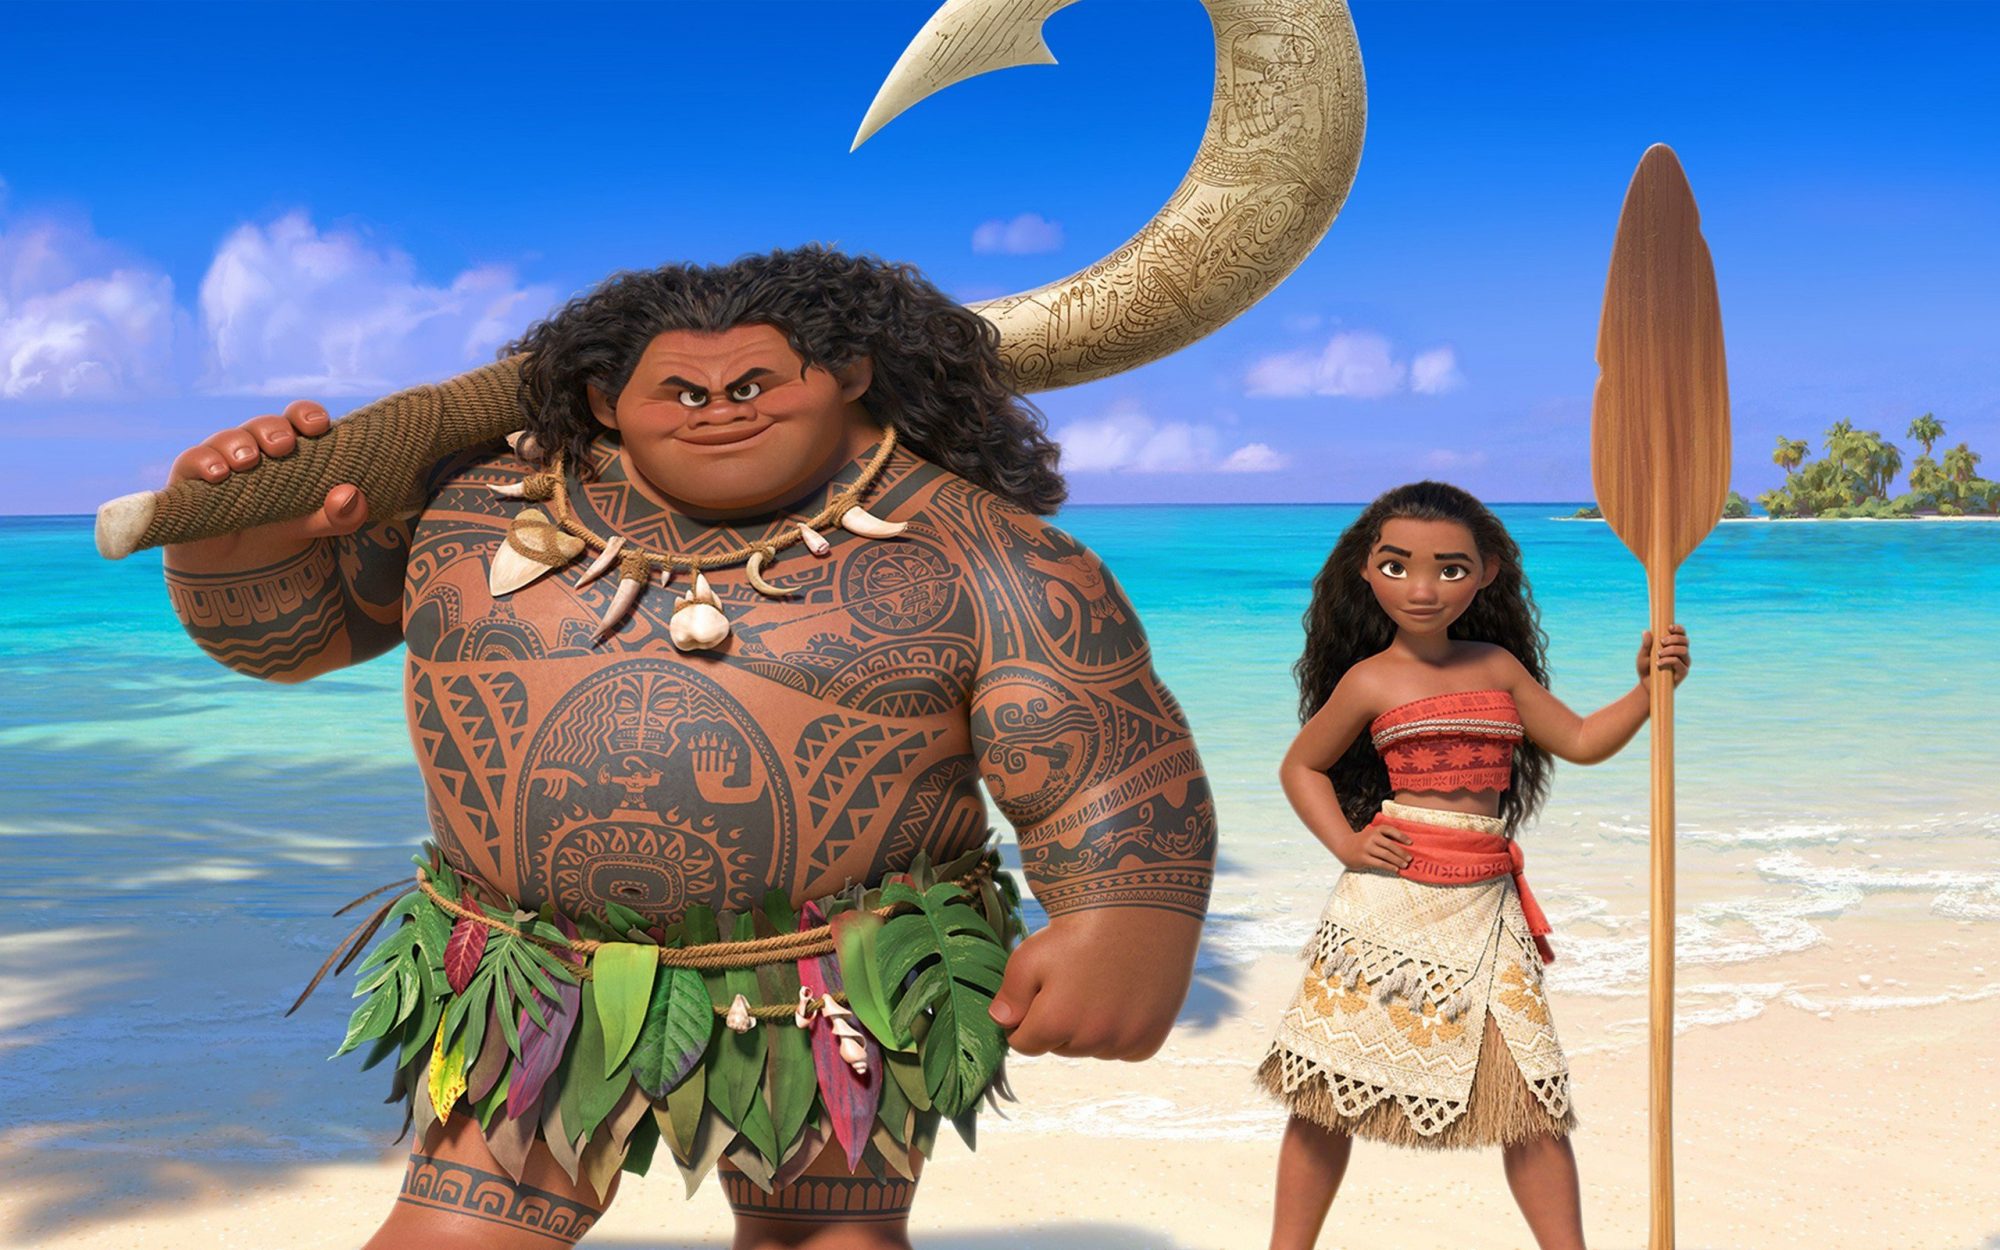 Get Ready An Iconic Pop Star Has Just Joined The Cast Of Moana Hellogiggles